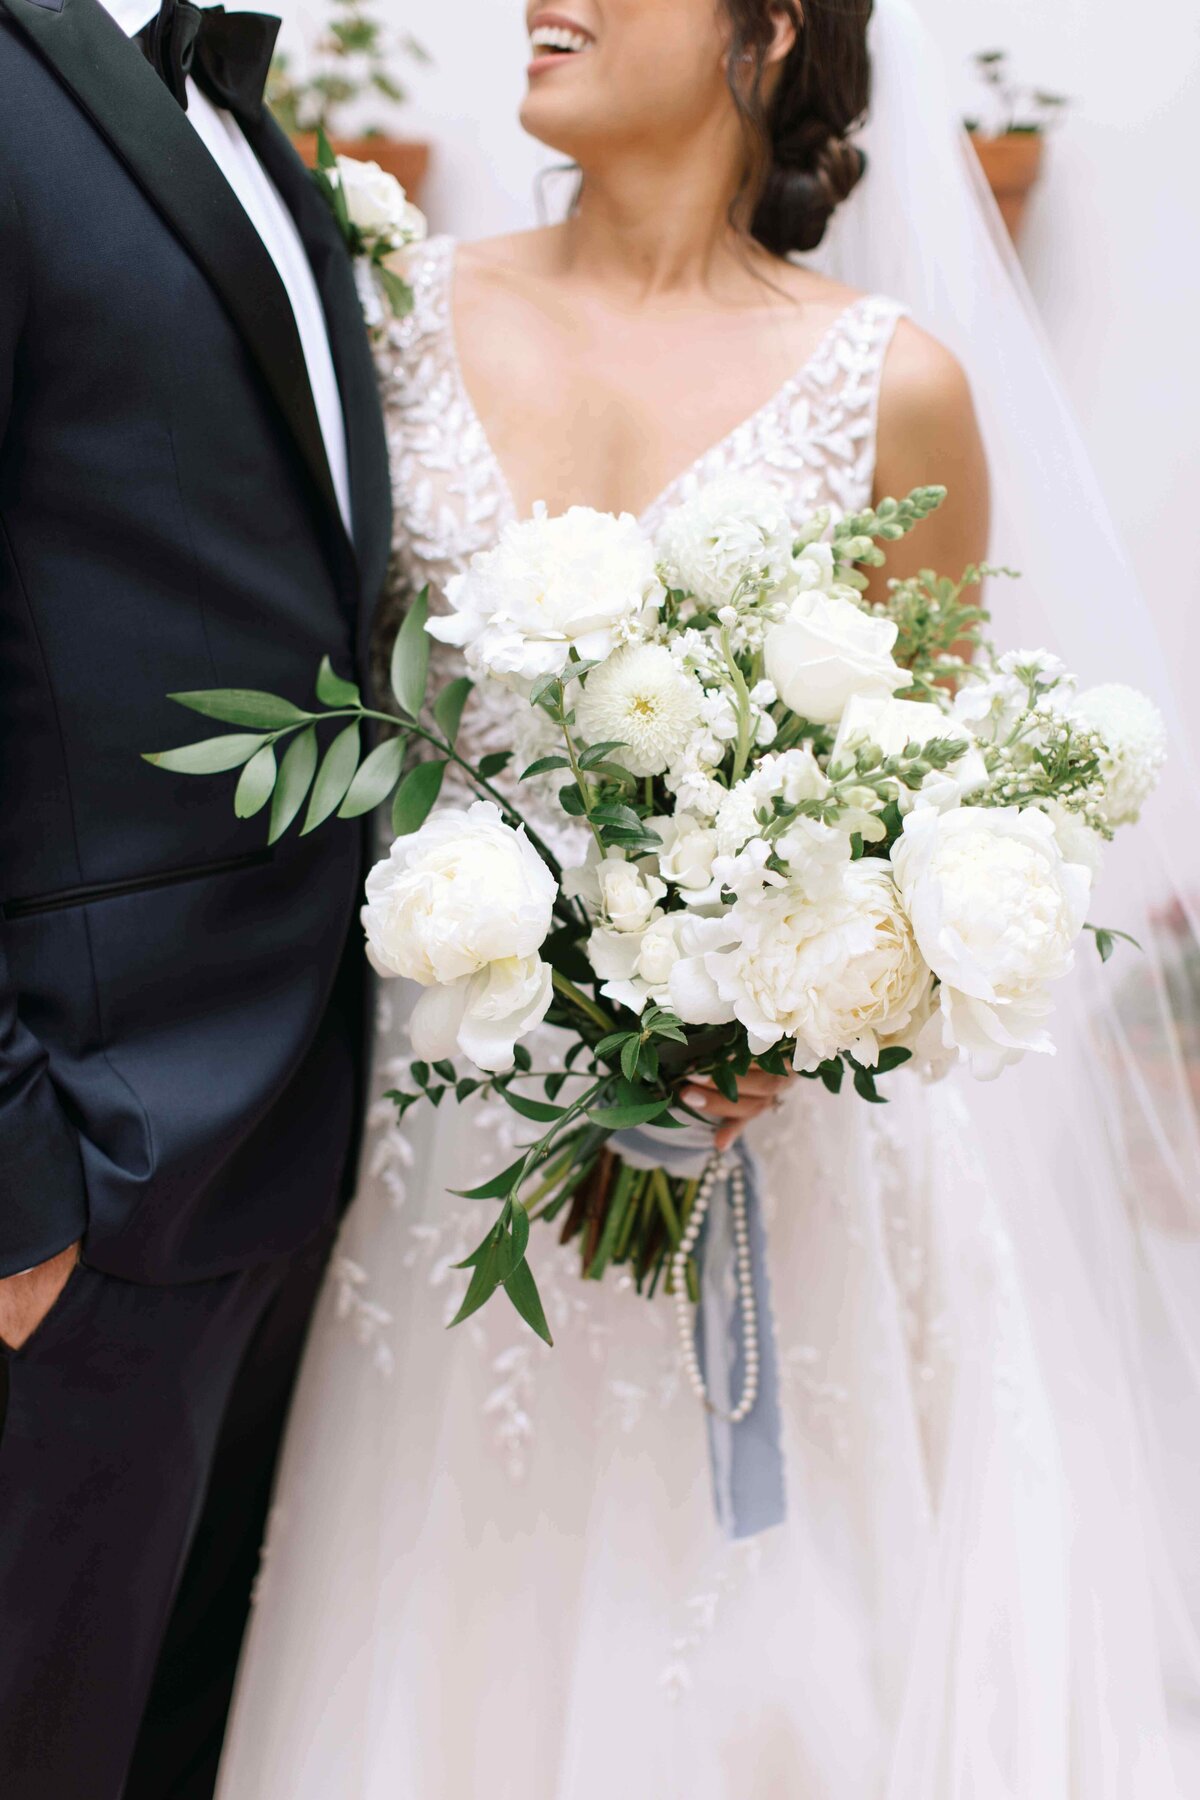 Bride holding a lush bouquet with white peonies